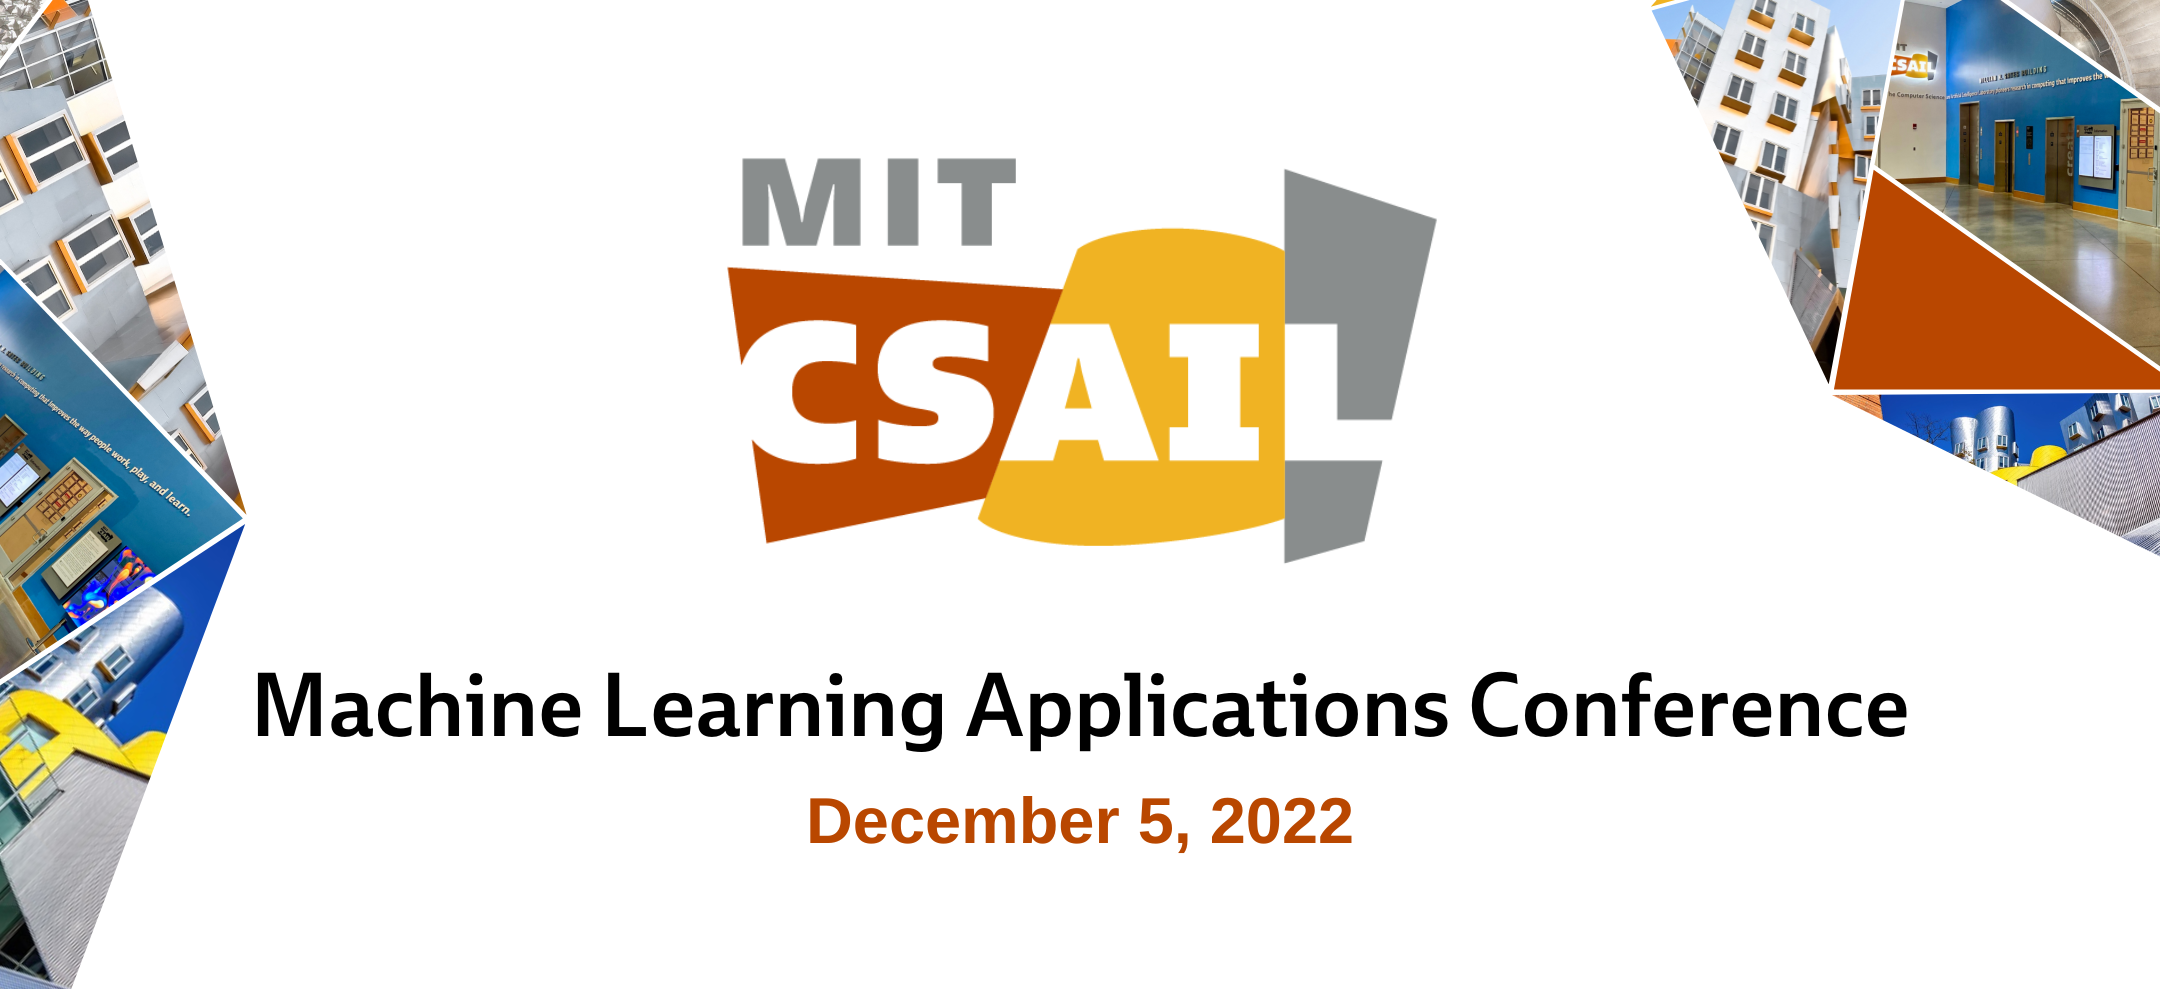 Machine Learning Applications at CSAIL Conference